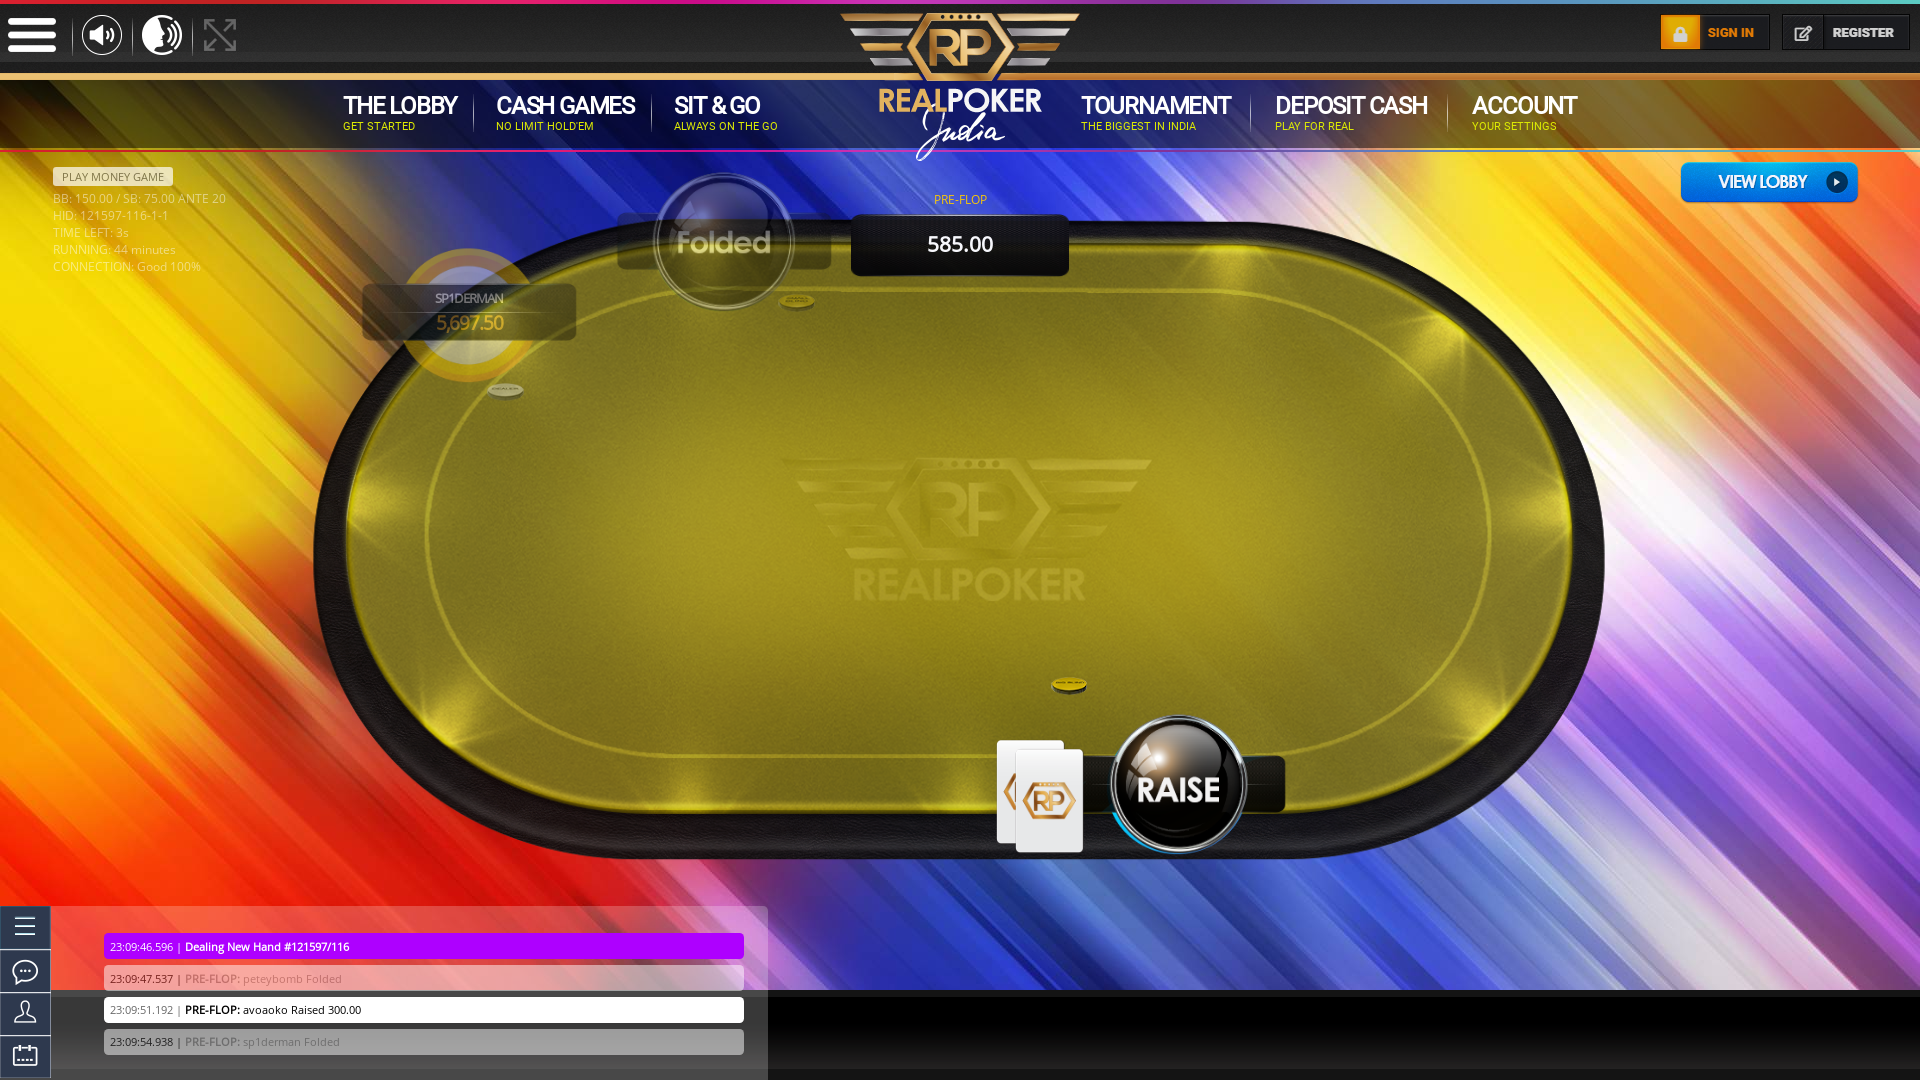 Colva poker table on a 10 player table in the 44th minute of the game